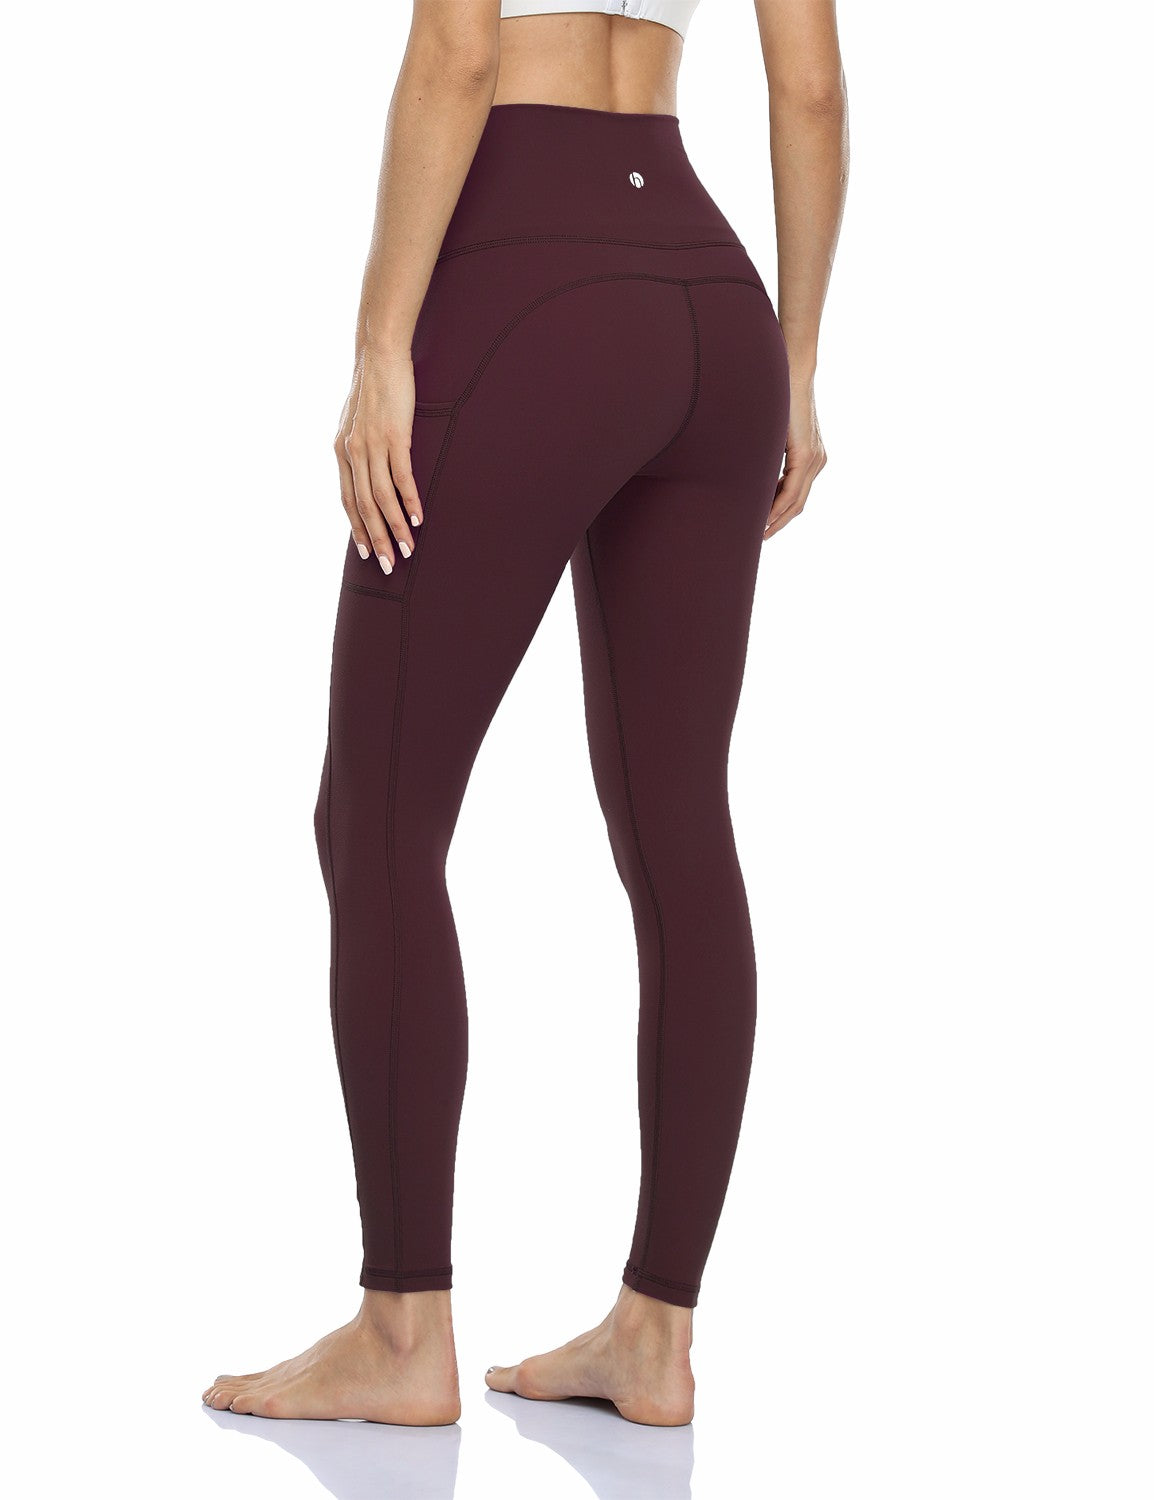 Heynuts Burgundy Active Pants Size XS - 41% off